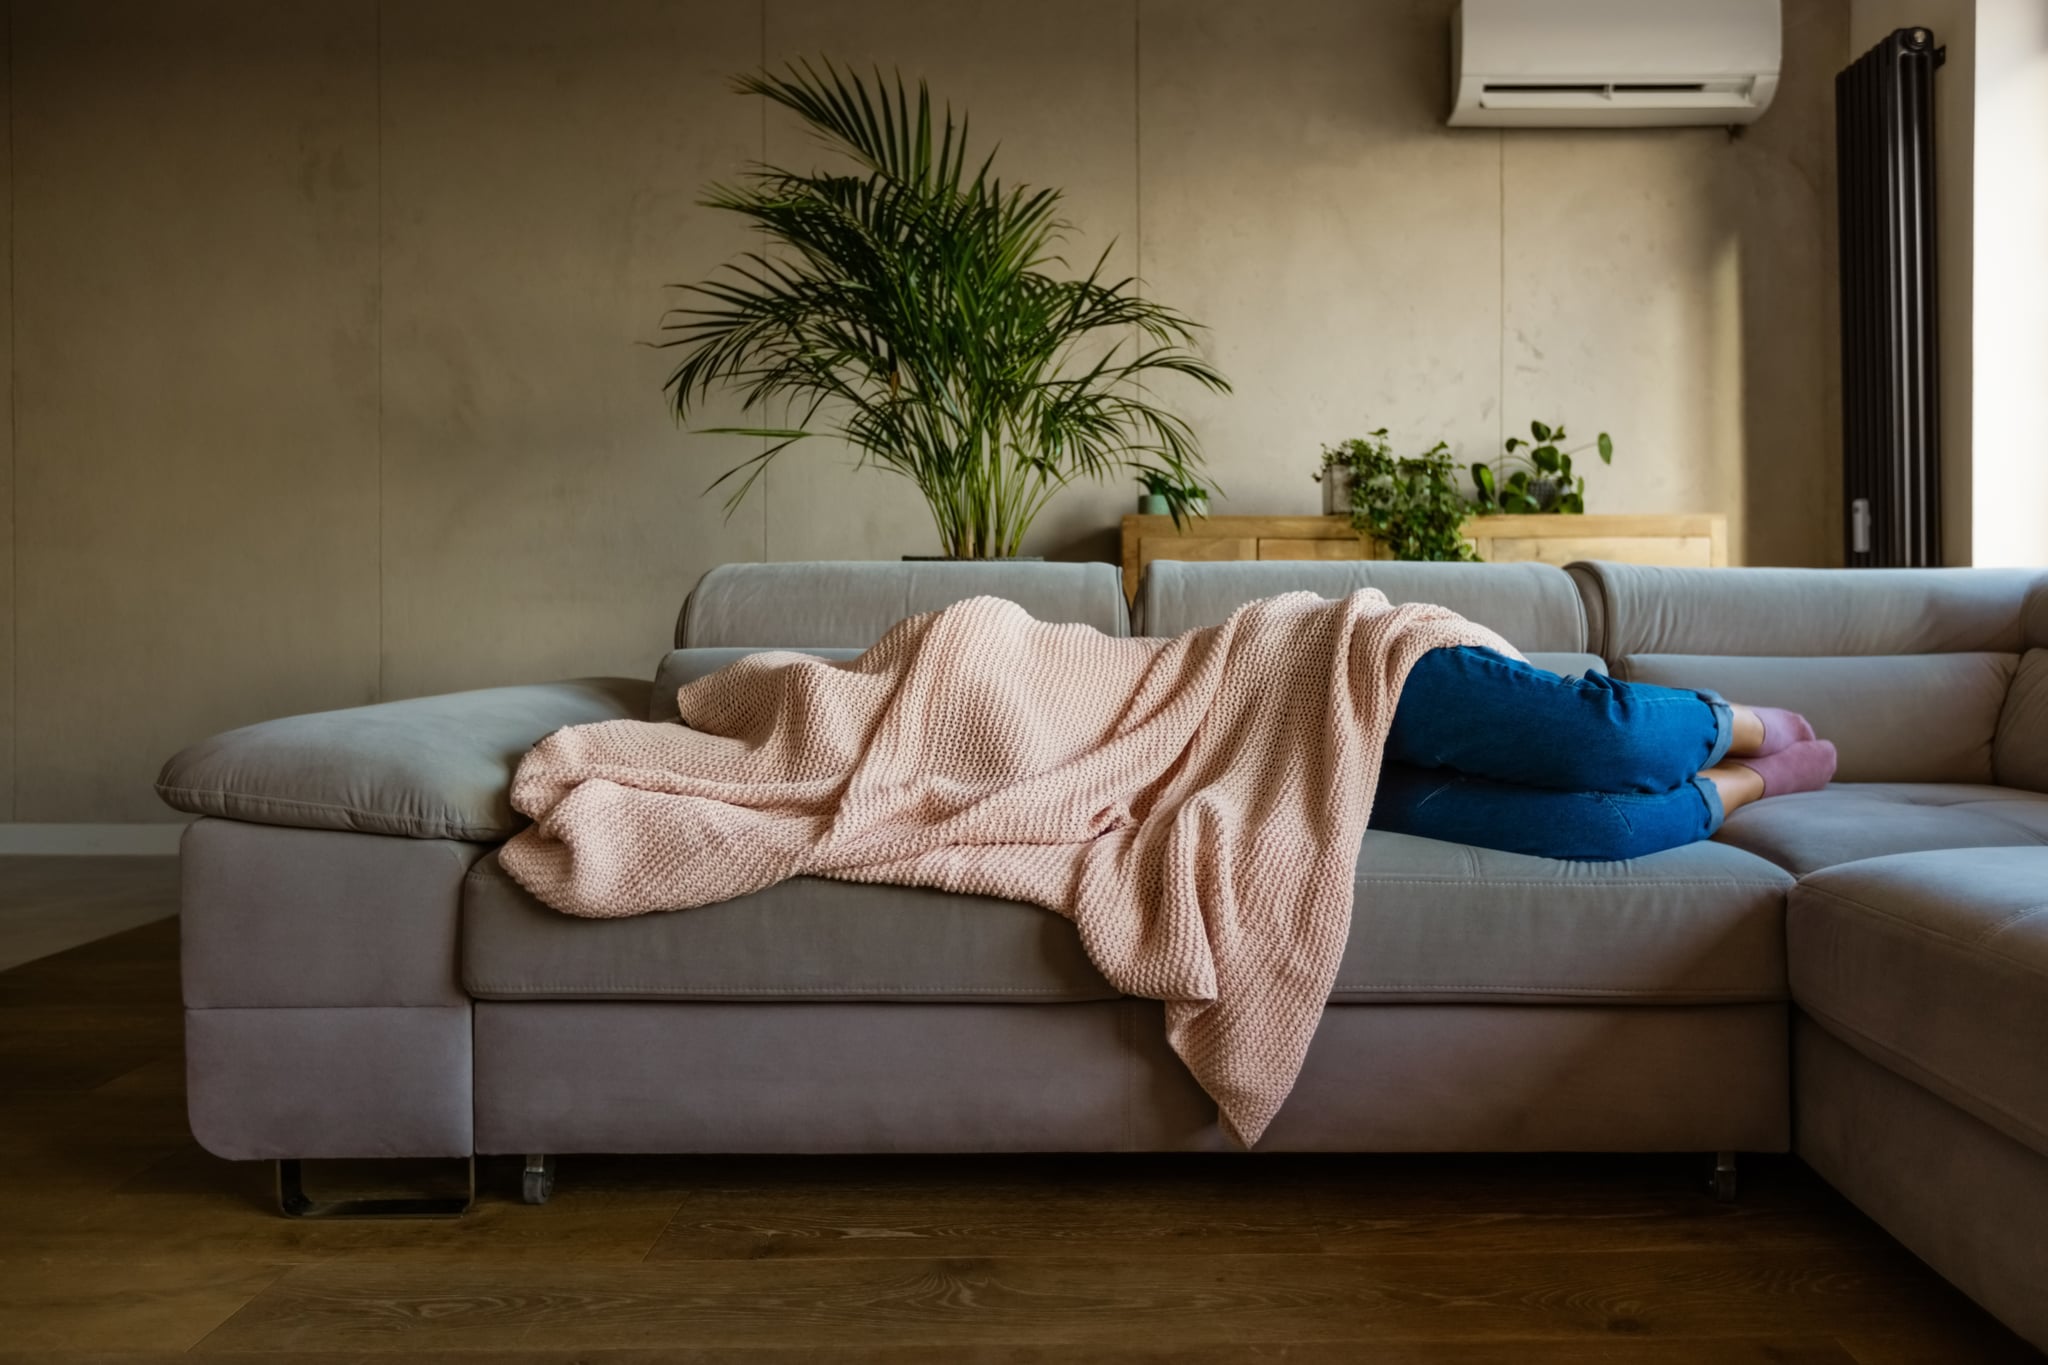 Young woman lying down on sofa in living room covered by blanket. Unrecognizable person.